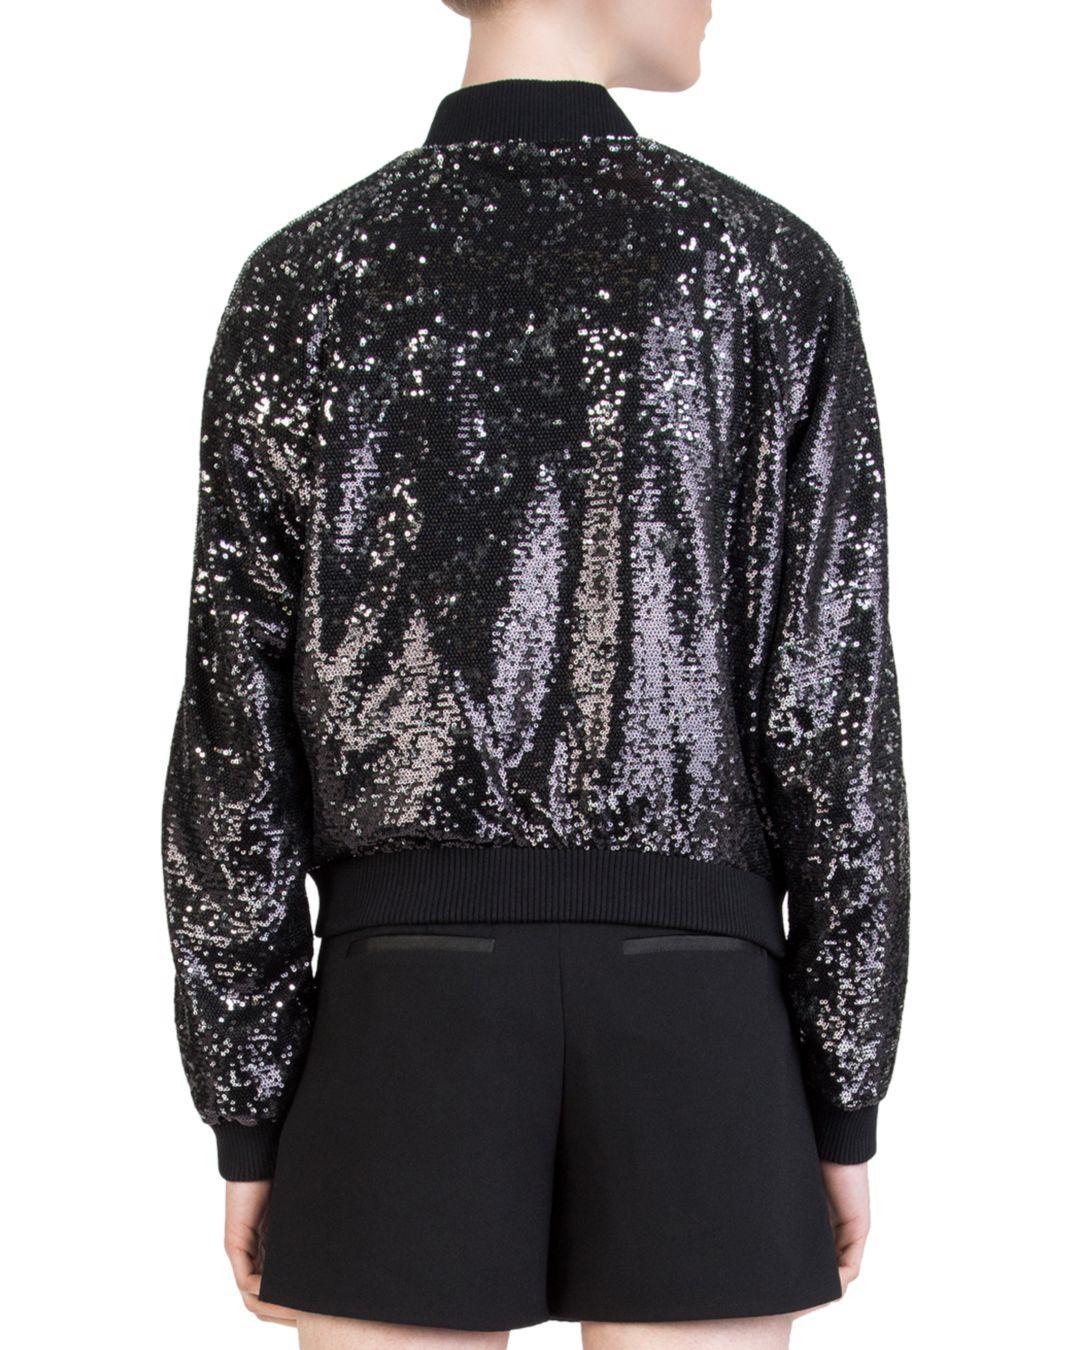 Lyst - The Kooples Sequined Bomber Jacket in Black